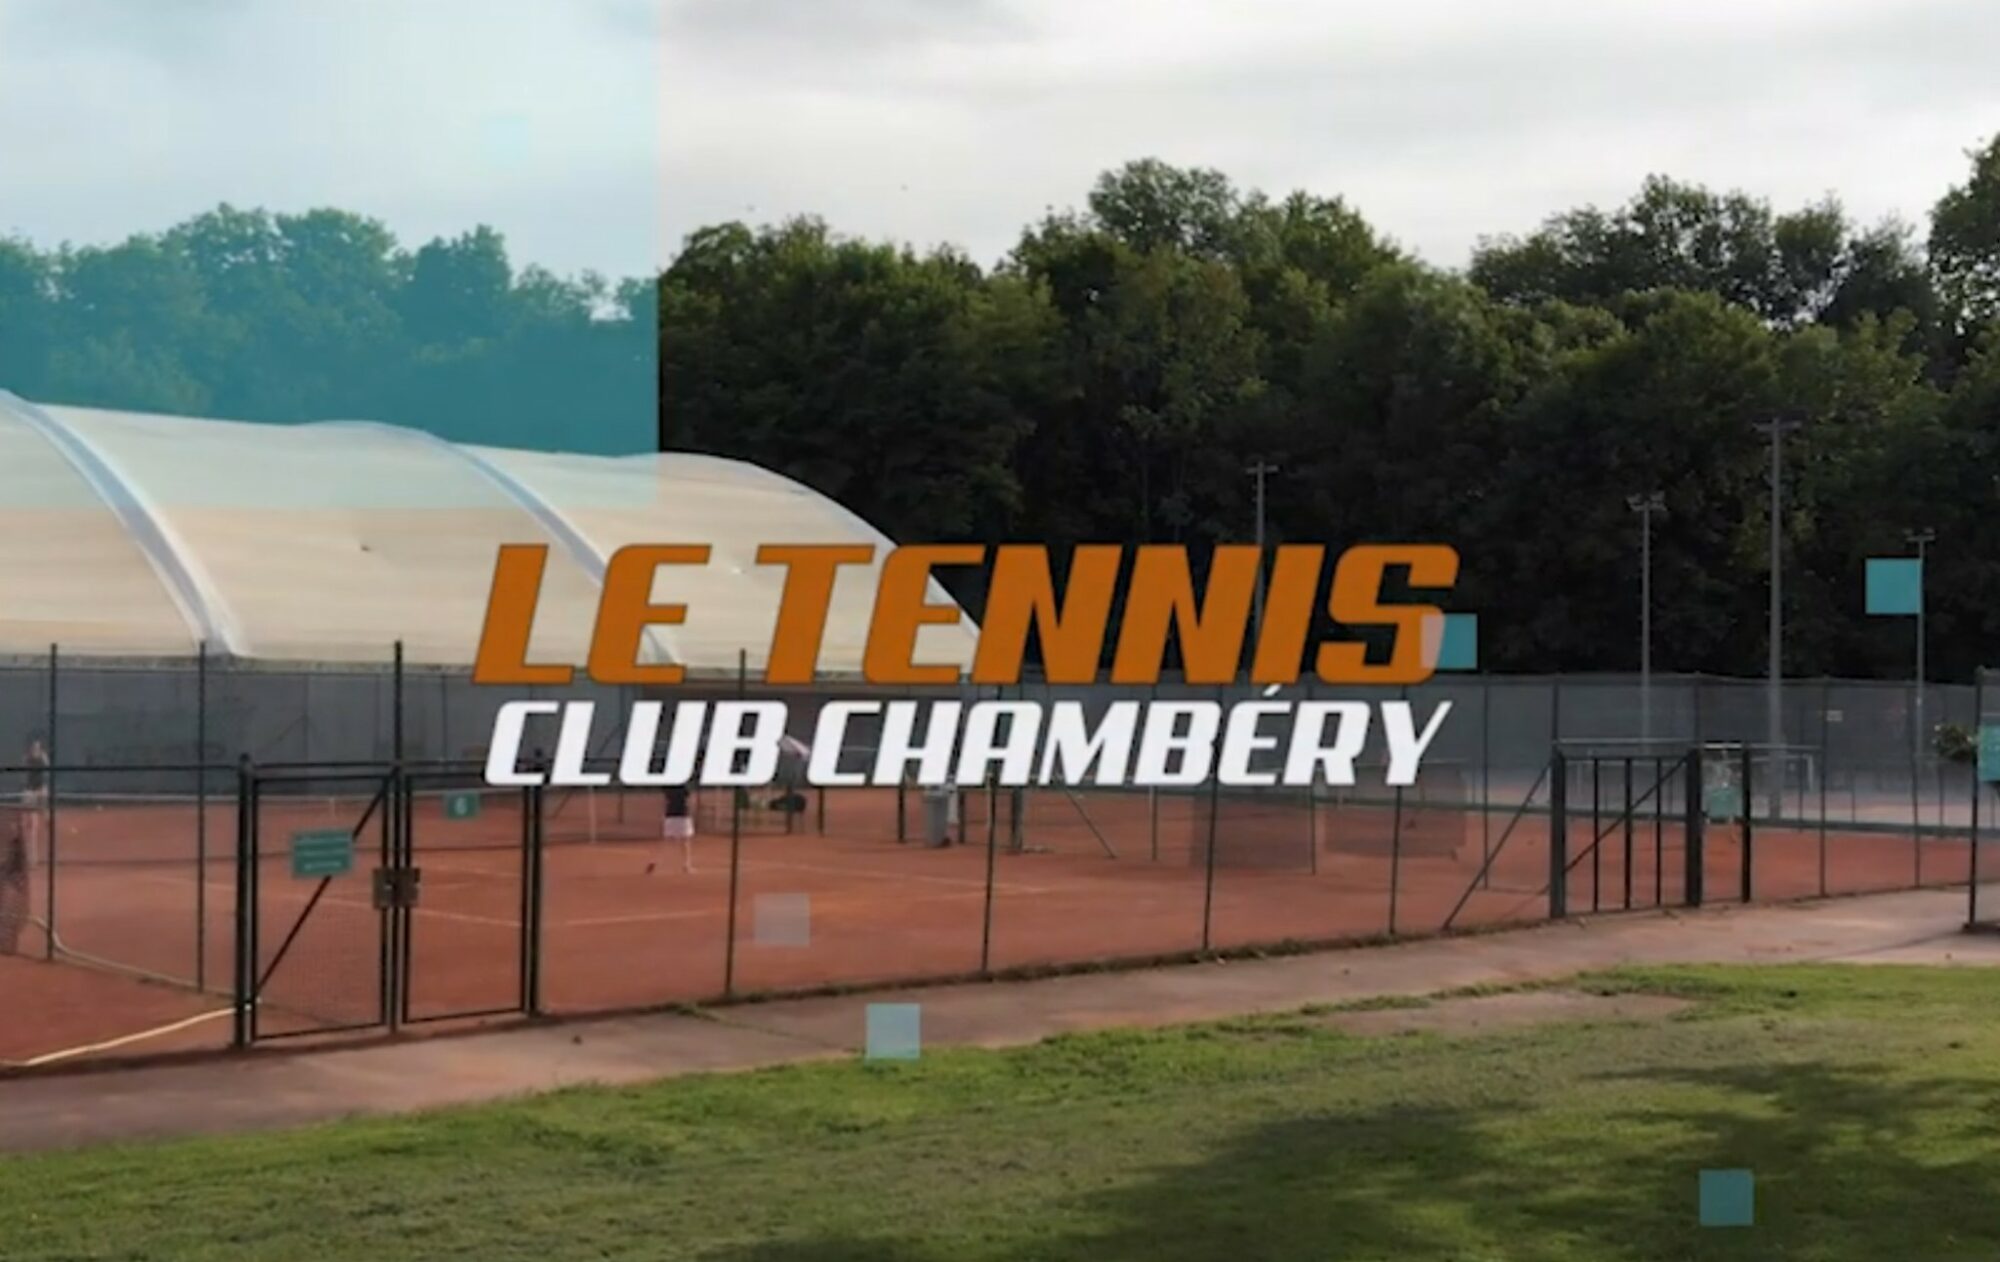 Le padel in Chambéry: See you soon!